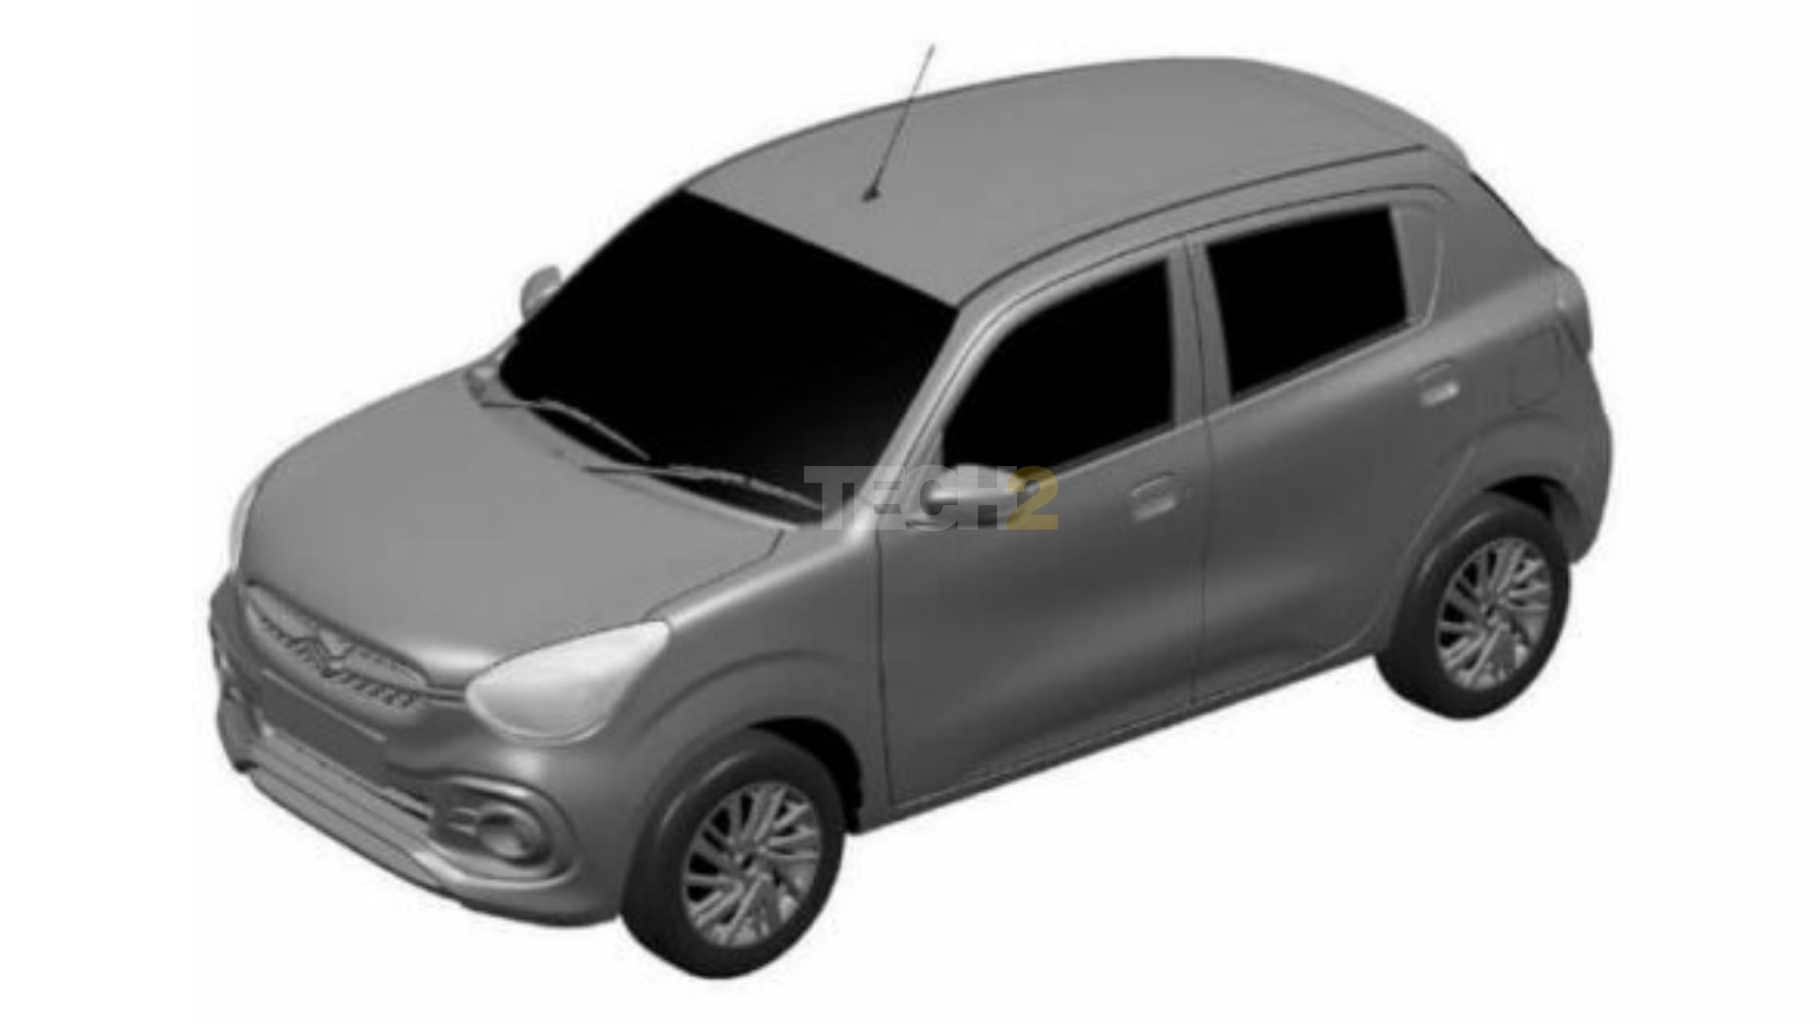 In its second generation, the 2021 Maruti Suzuki Celerio is expected to upgrade to the Heartect platform.